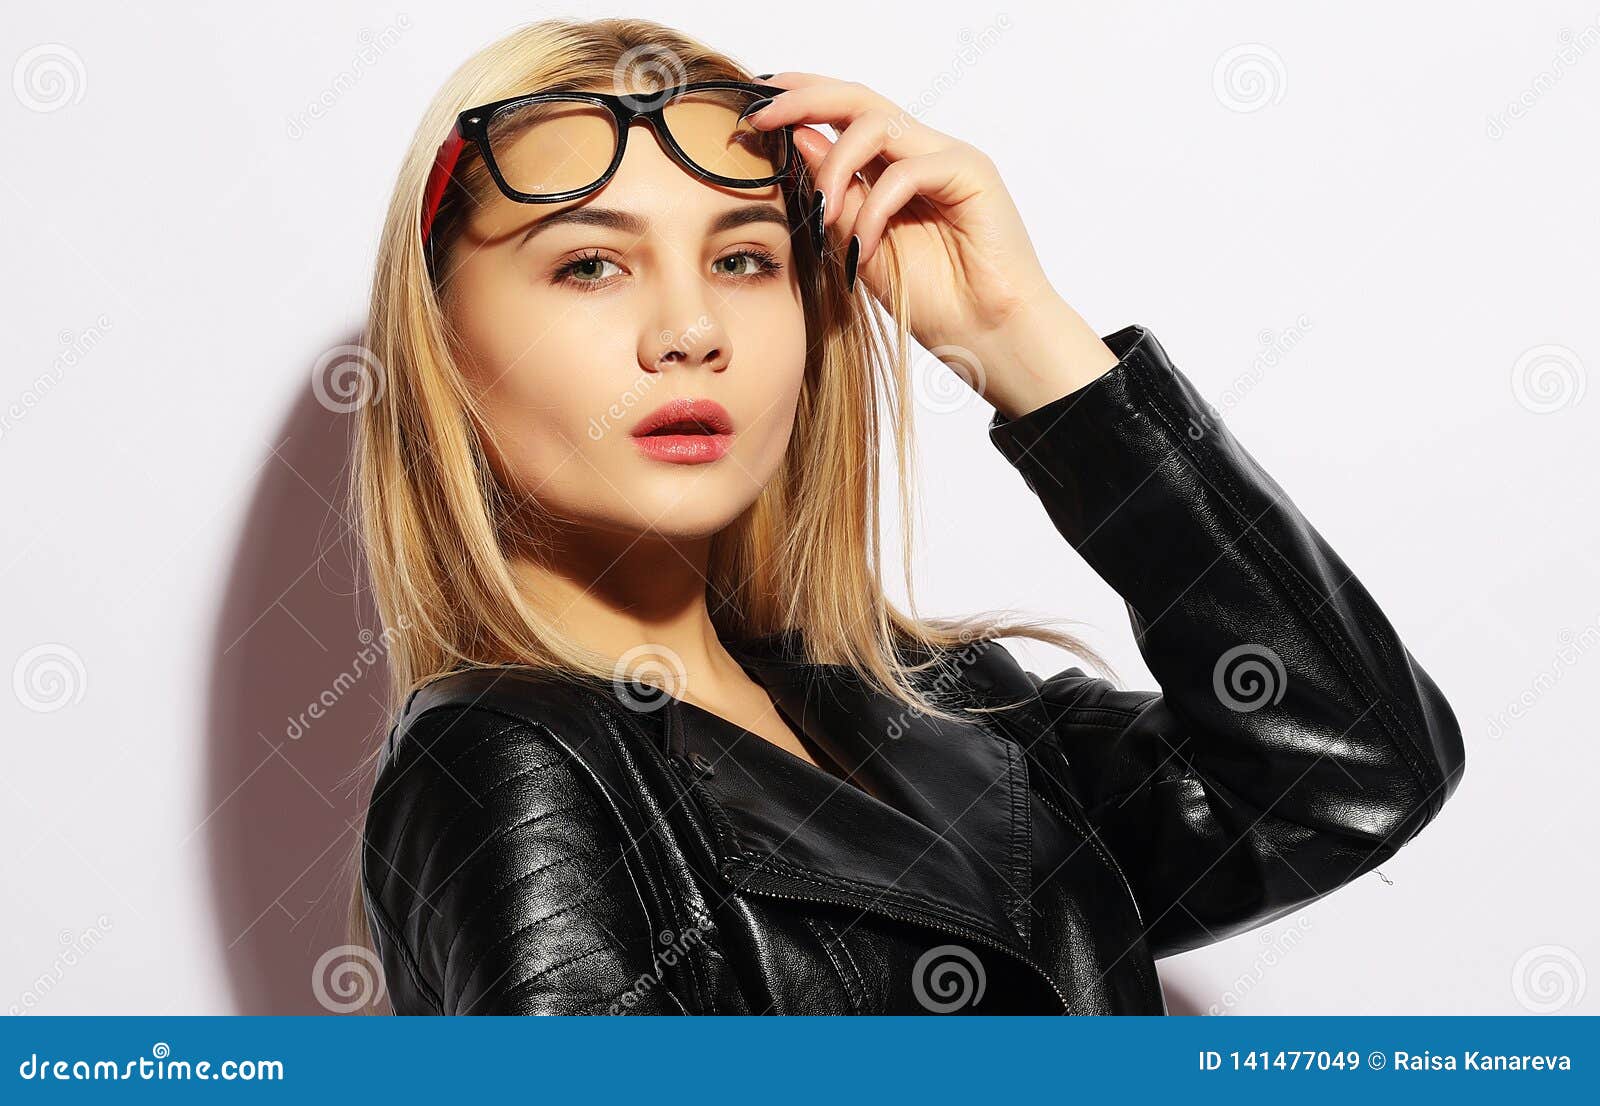 Fashion Model in Black Clothing. Leather Jacket and Pants, Glasses ...